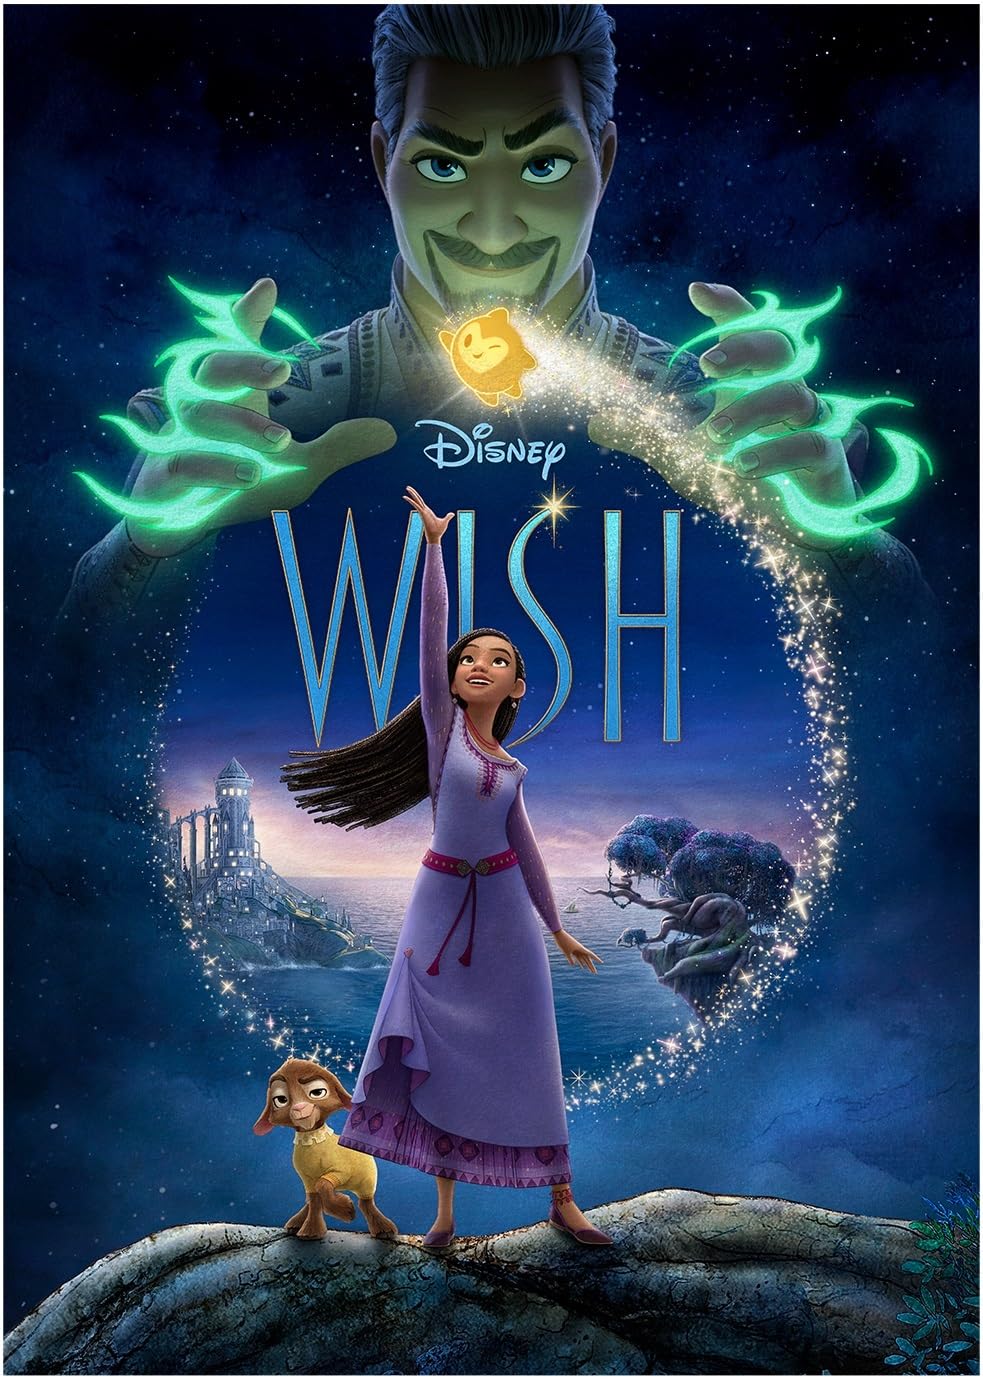 Image for "Wish"